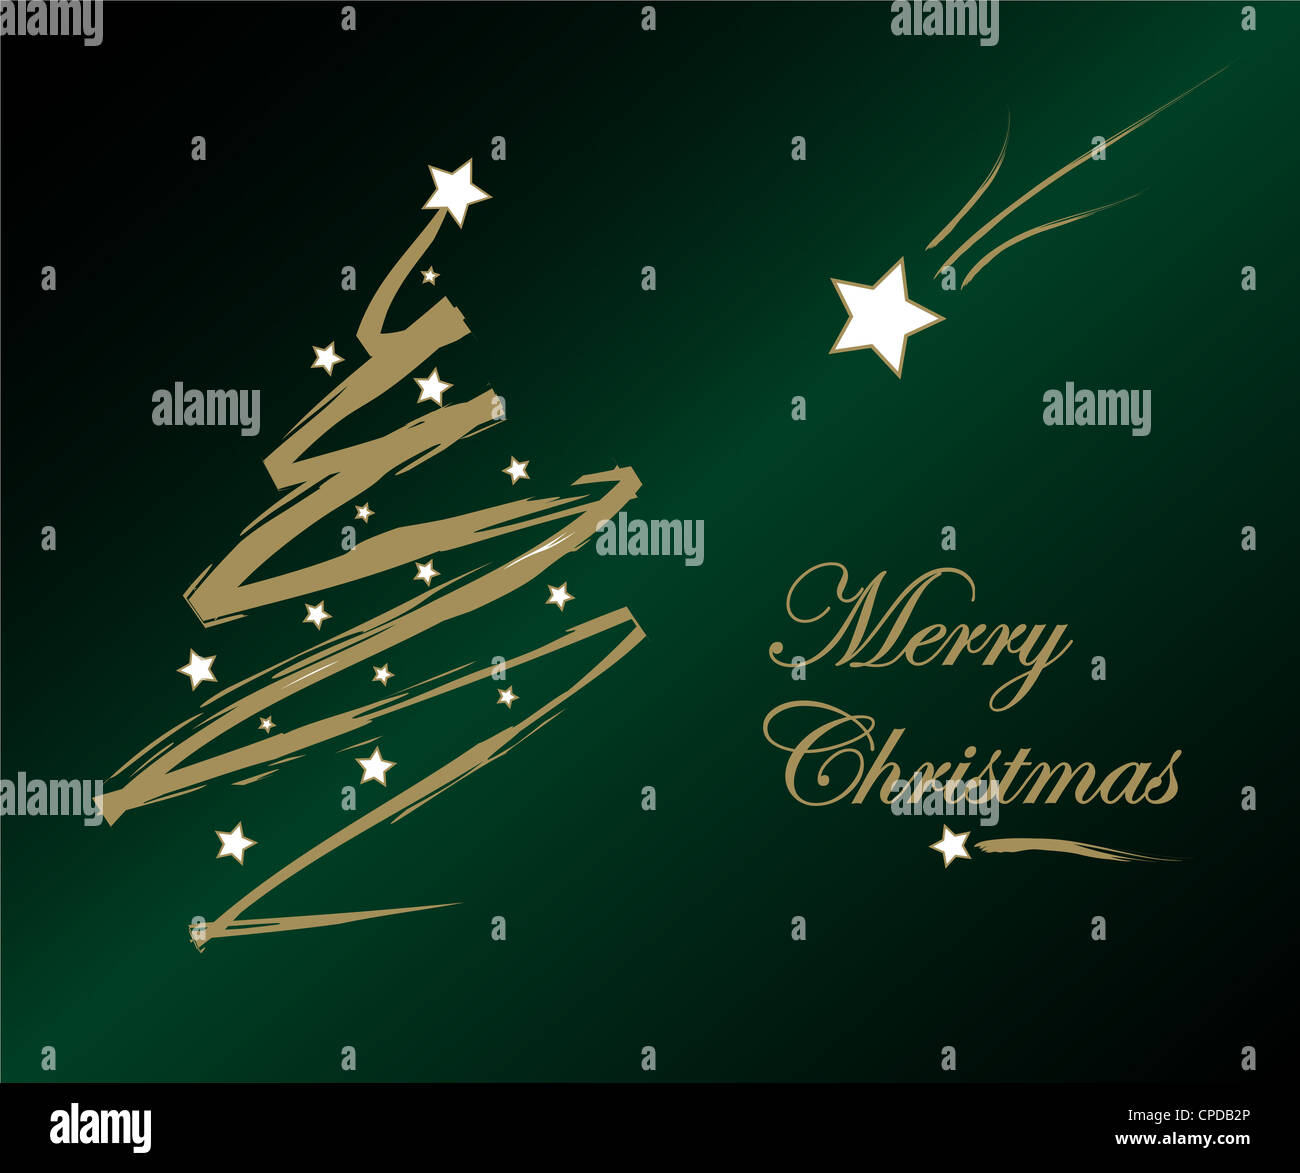 Merry Christmas greetings in gold on green background Stock Photo